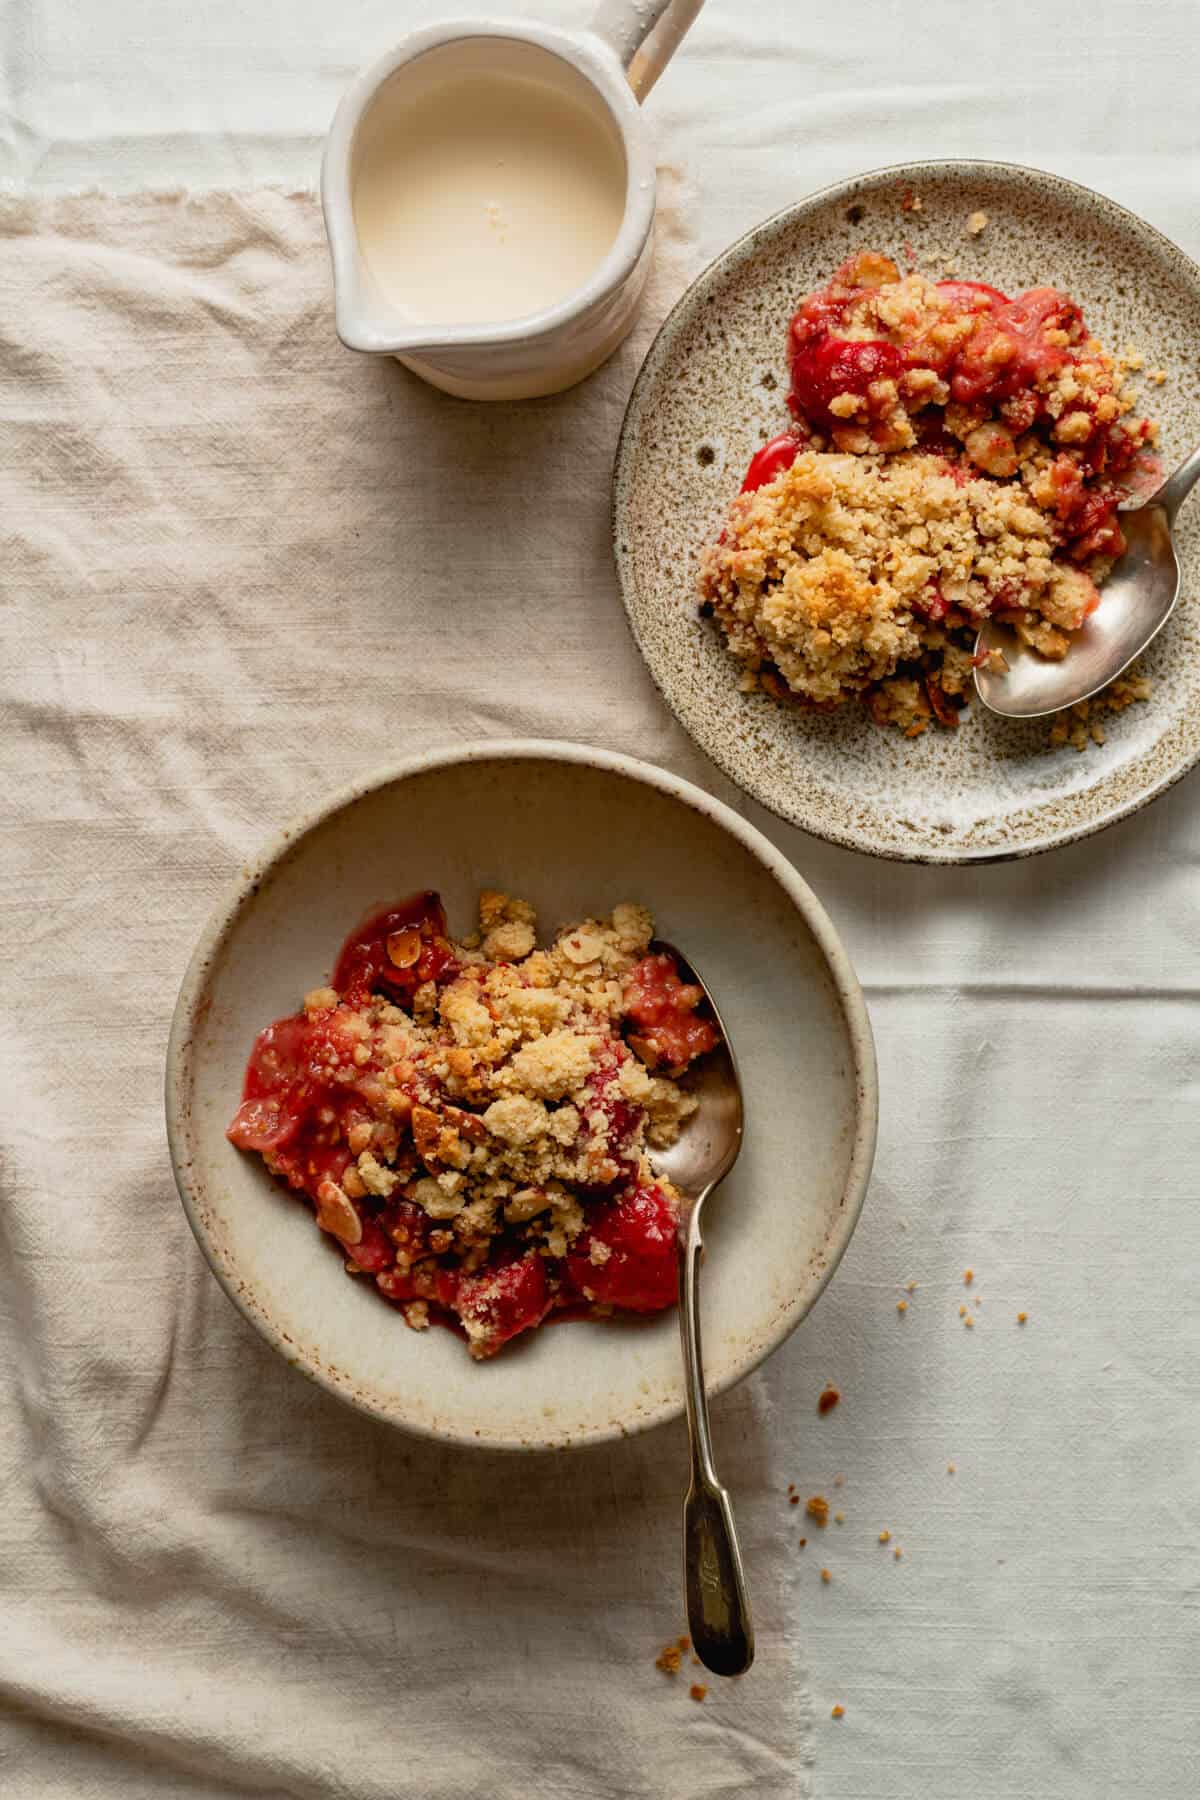 Strawberry crumble served up in a bowl and a plate with cream in a jug with spoons.